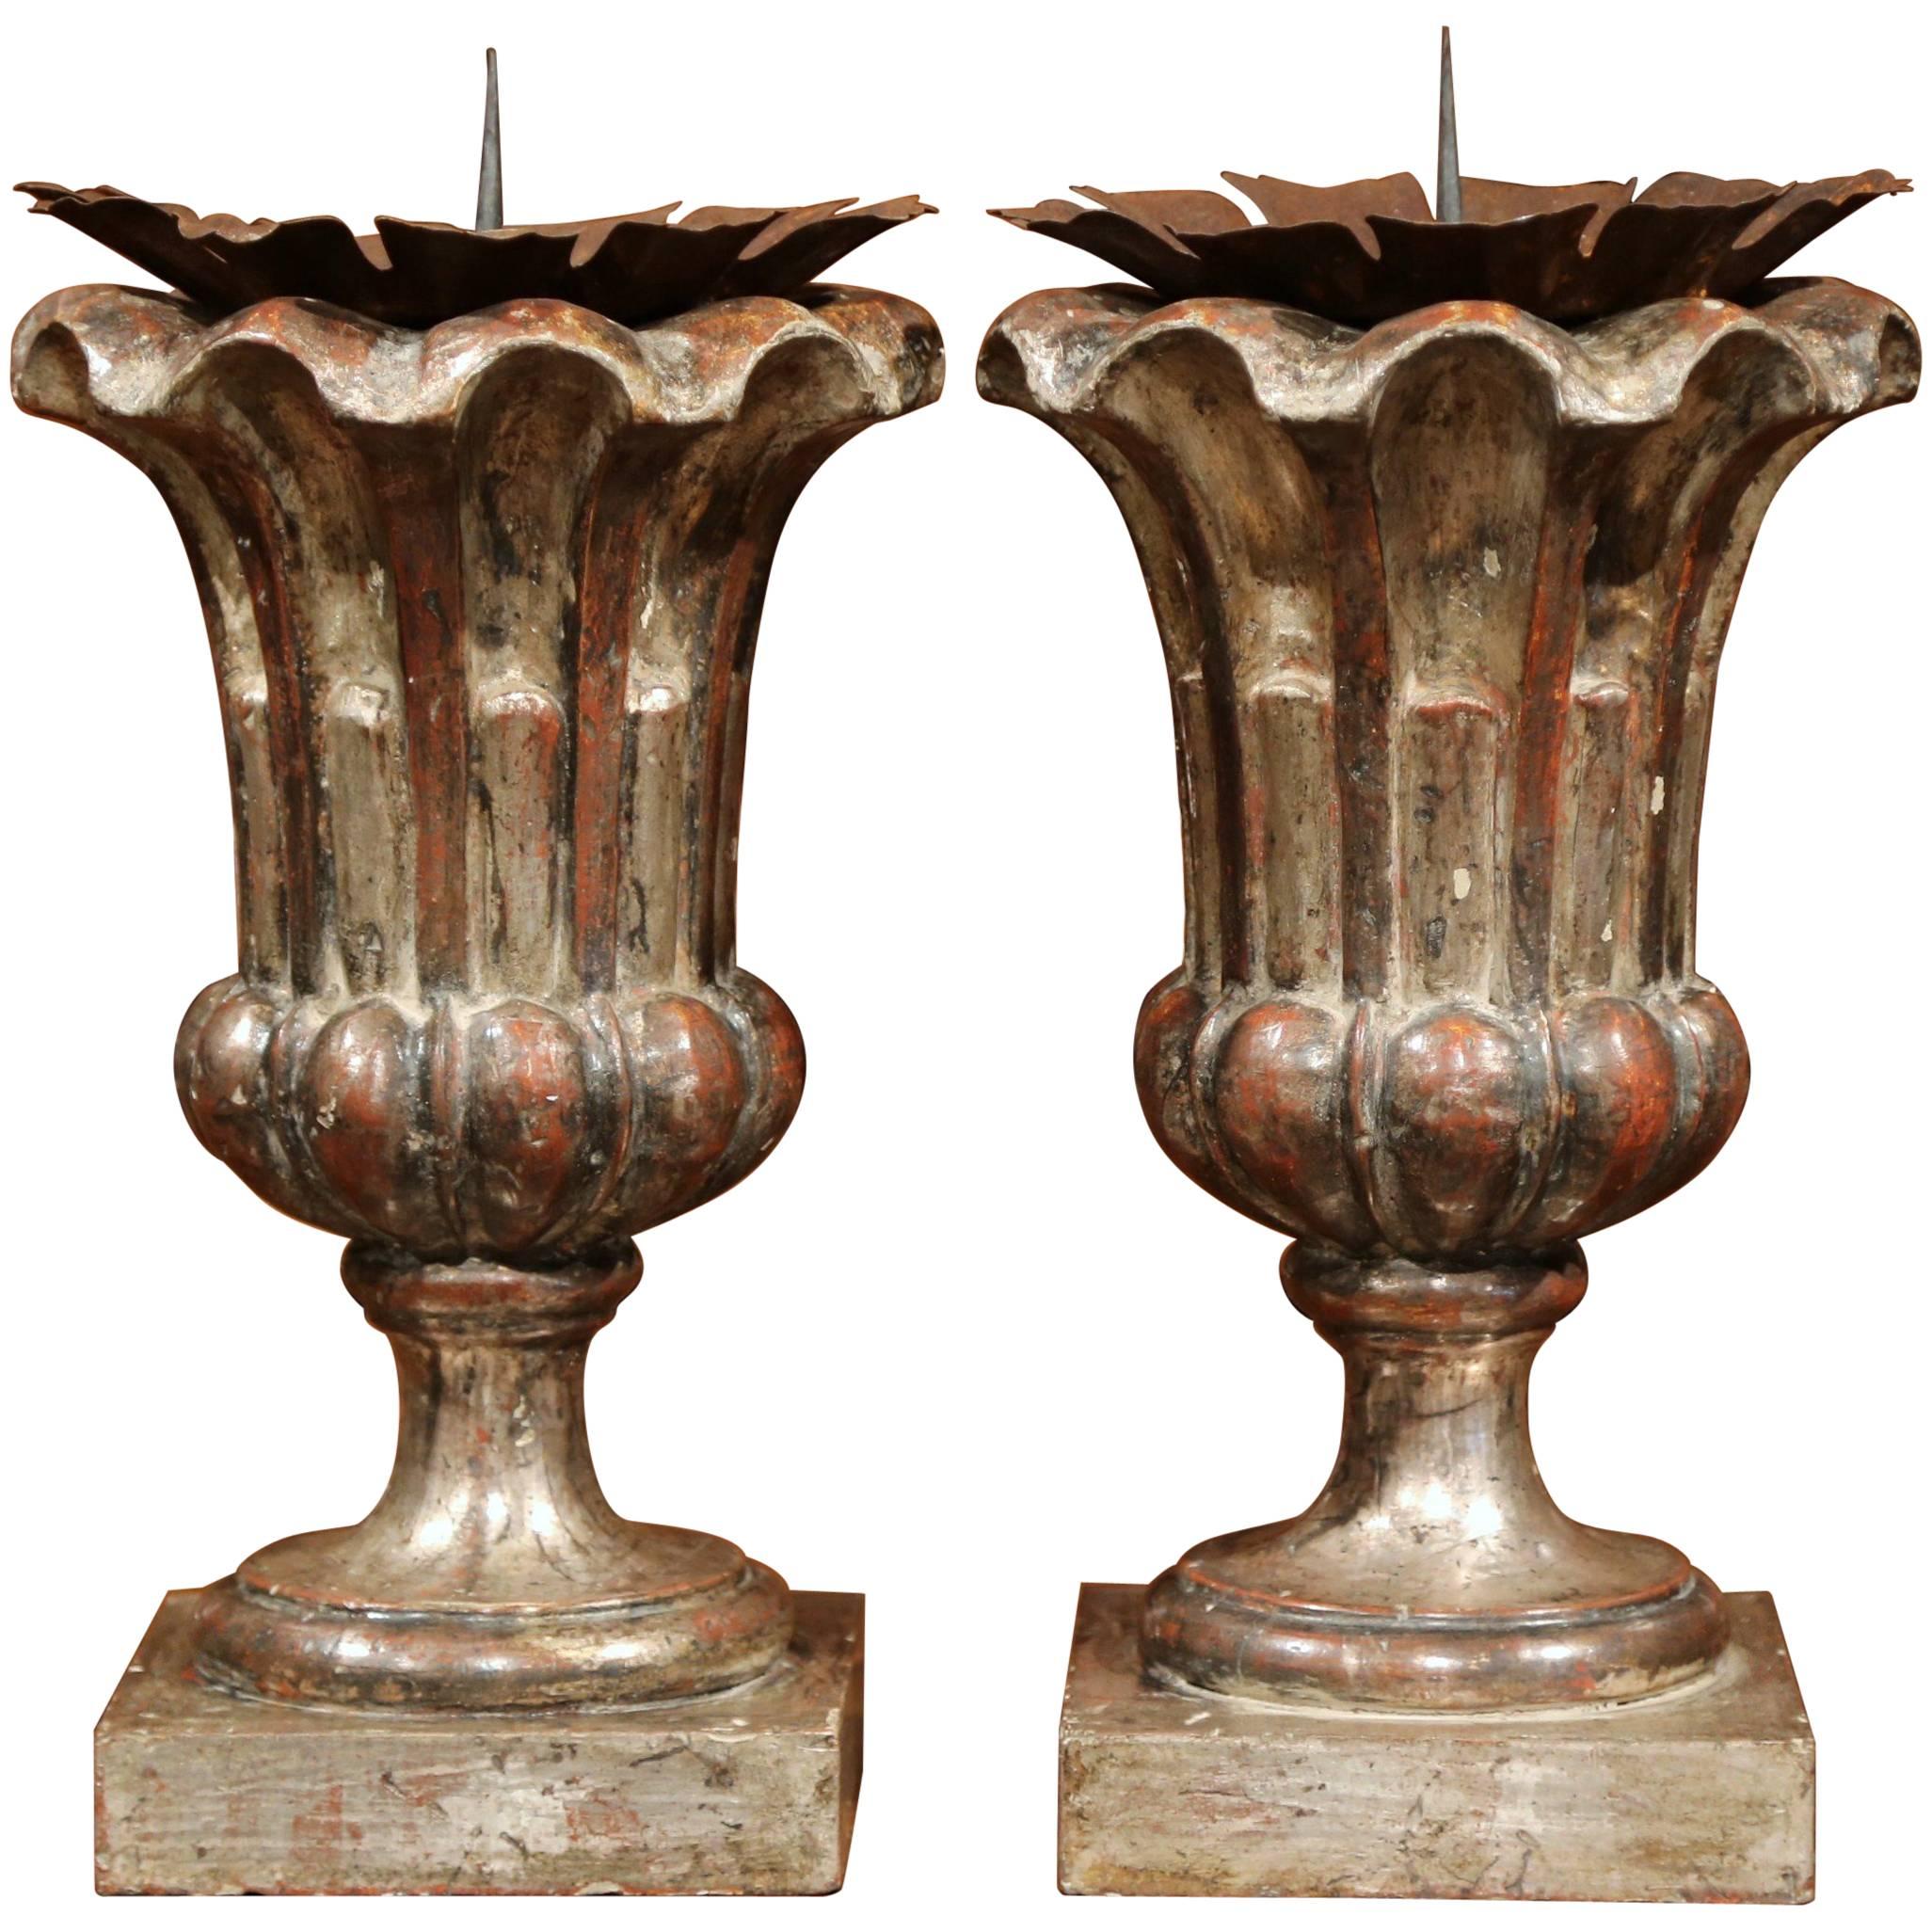 Pair of Italian Hand-Carved Silver Leaf Pricket Candlesticks with Metal Bobeches